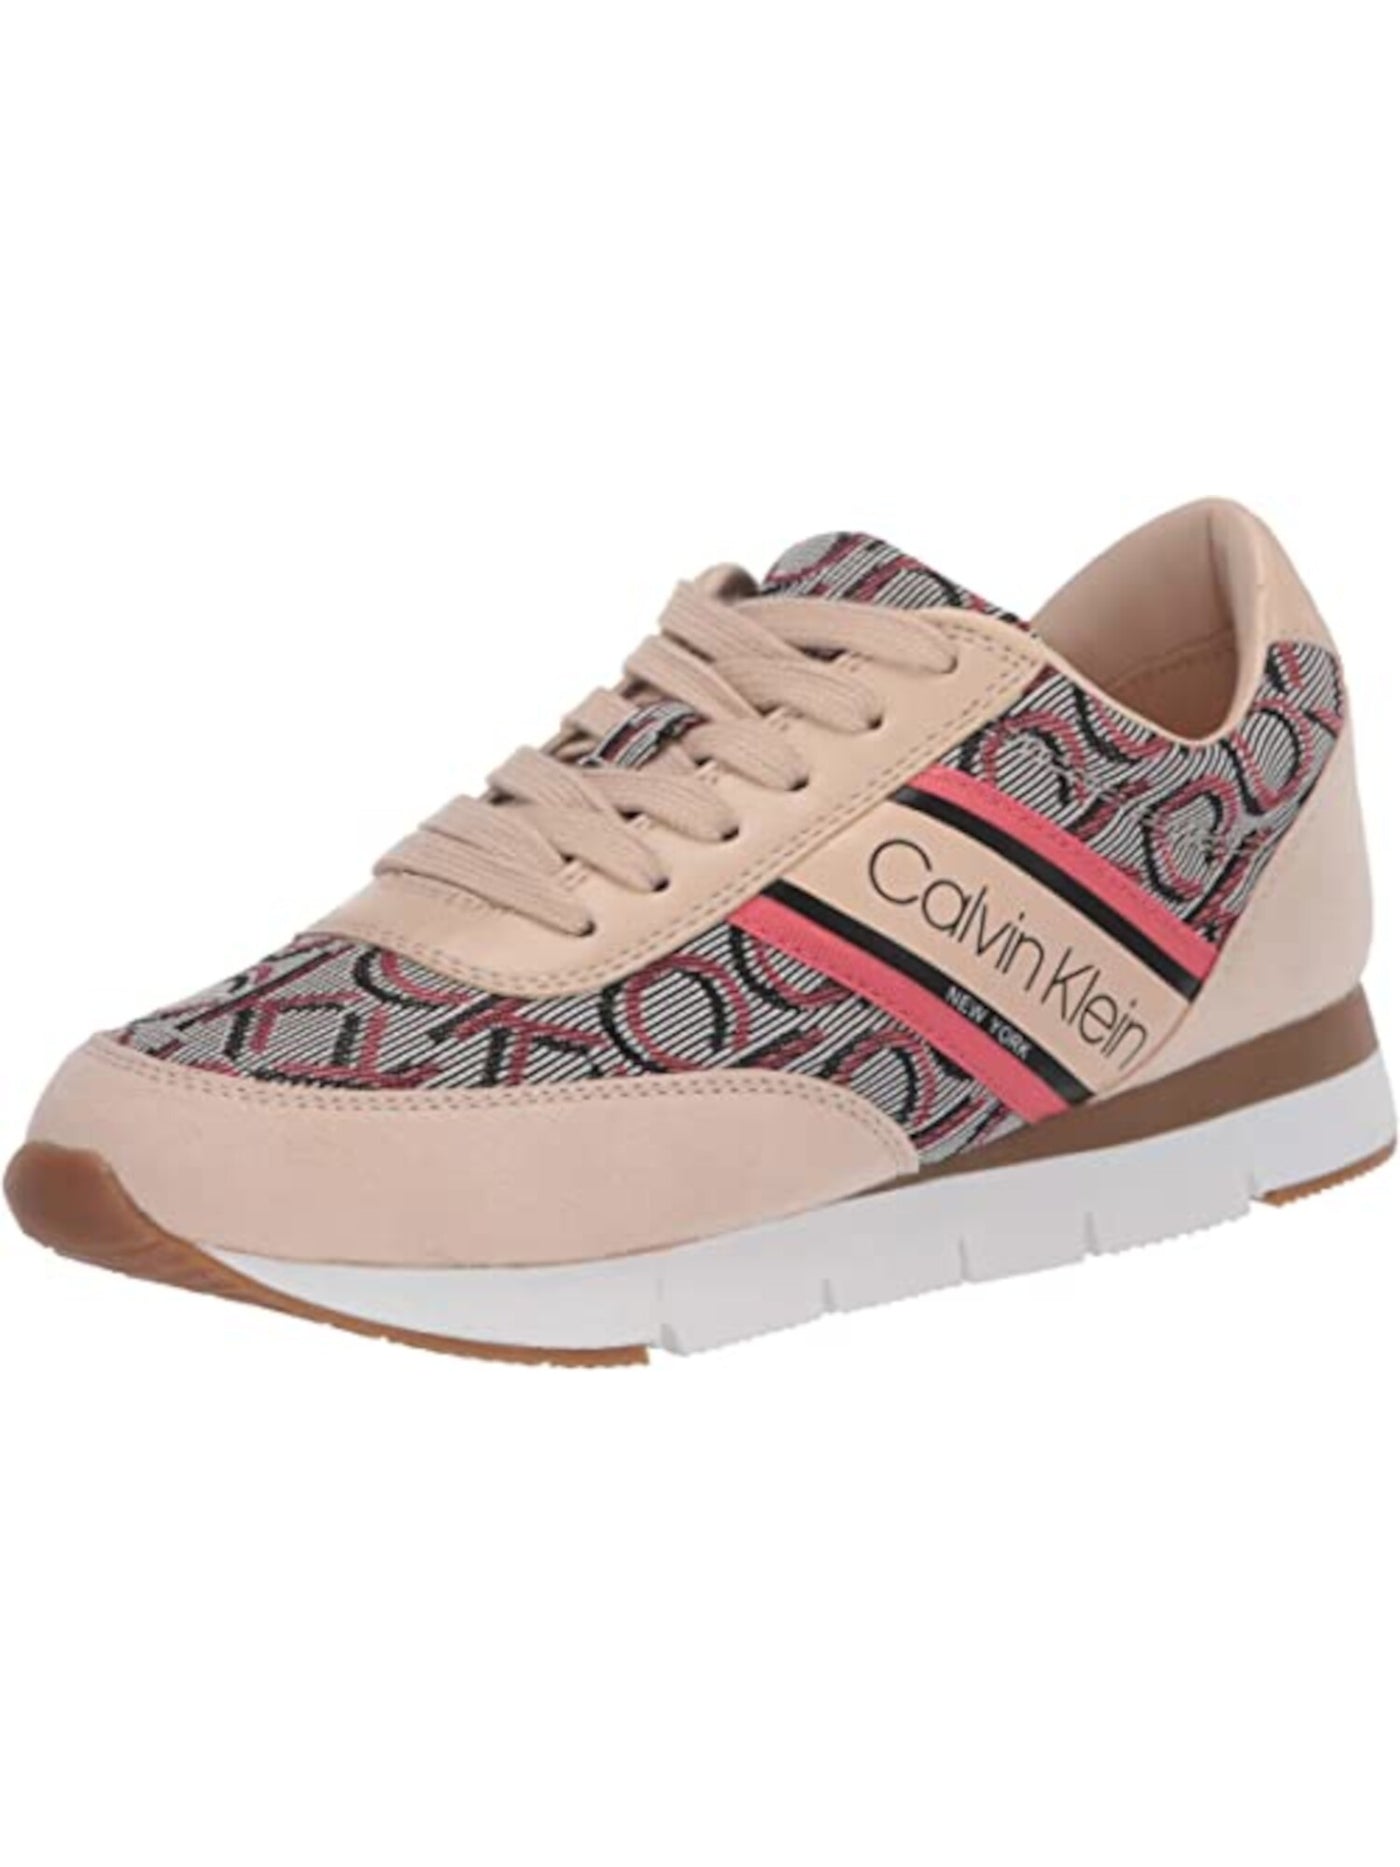 CALVIN KLEIN Womens Beige Logo Cushioned Tea Round Toe Wedge Lace-Up Athletic Sneakers Shoes 10 M